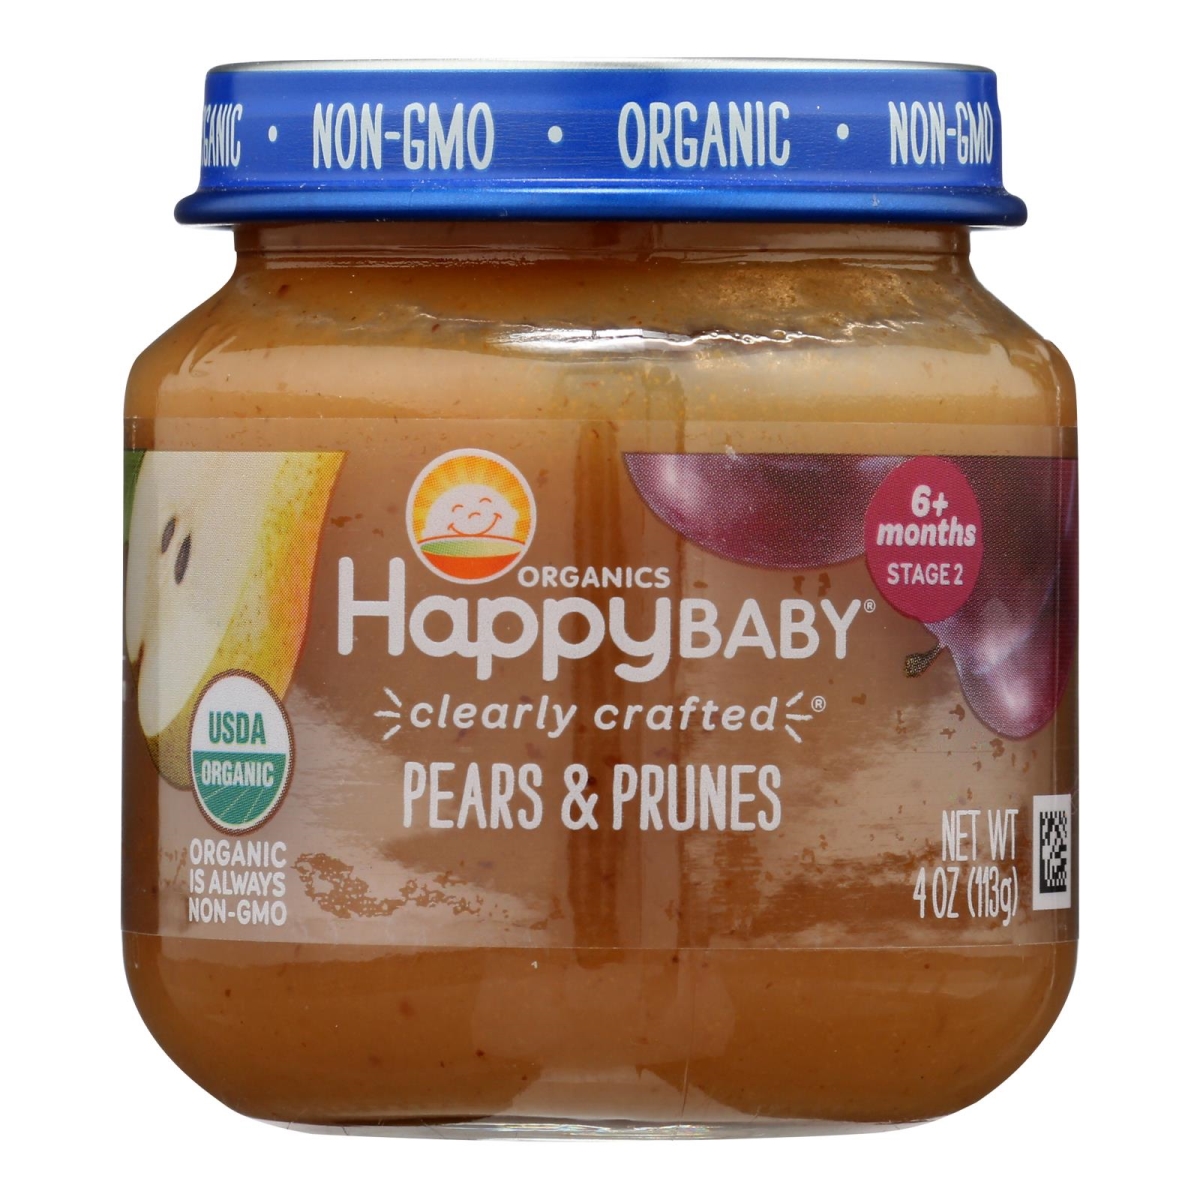 2473973 4 oz Clearly Crafted Organic Stage 2 Pears & Prunes Jars -  Happy Baby